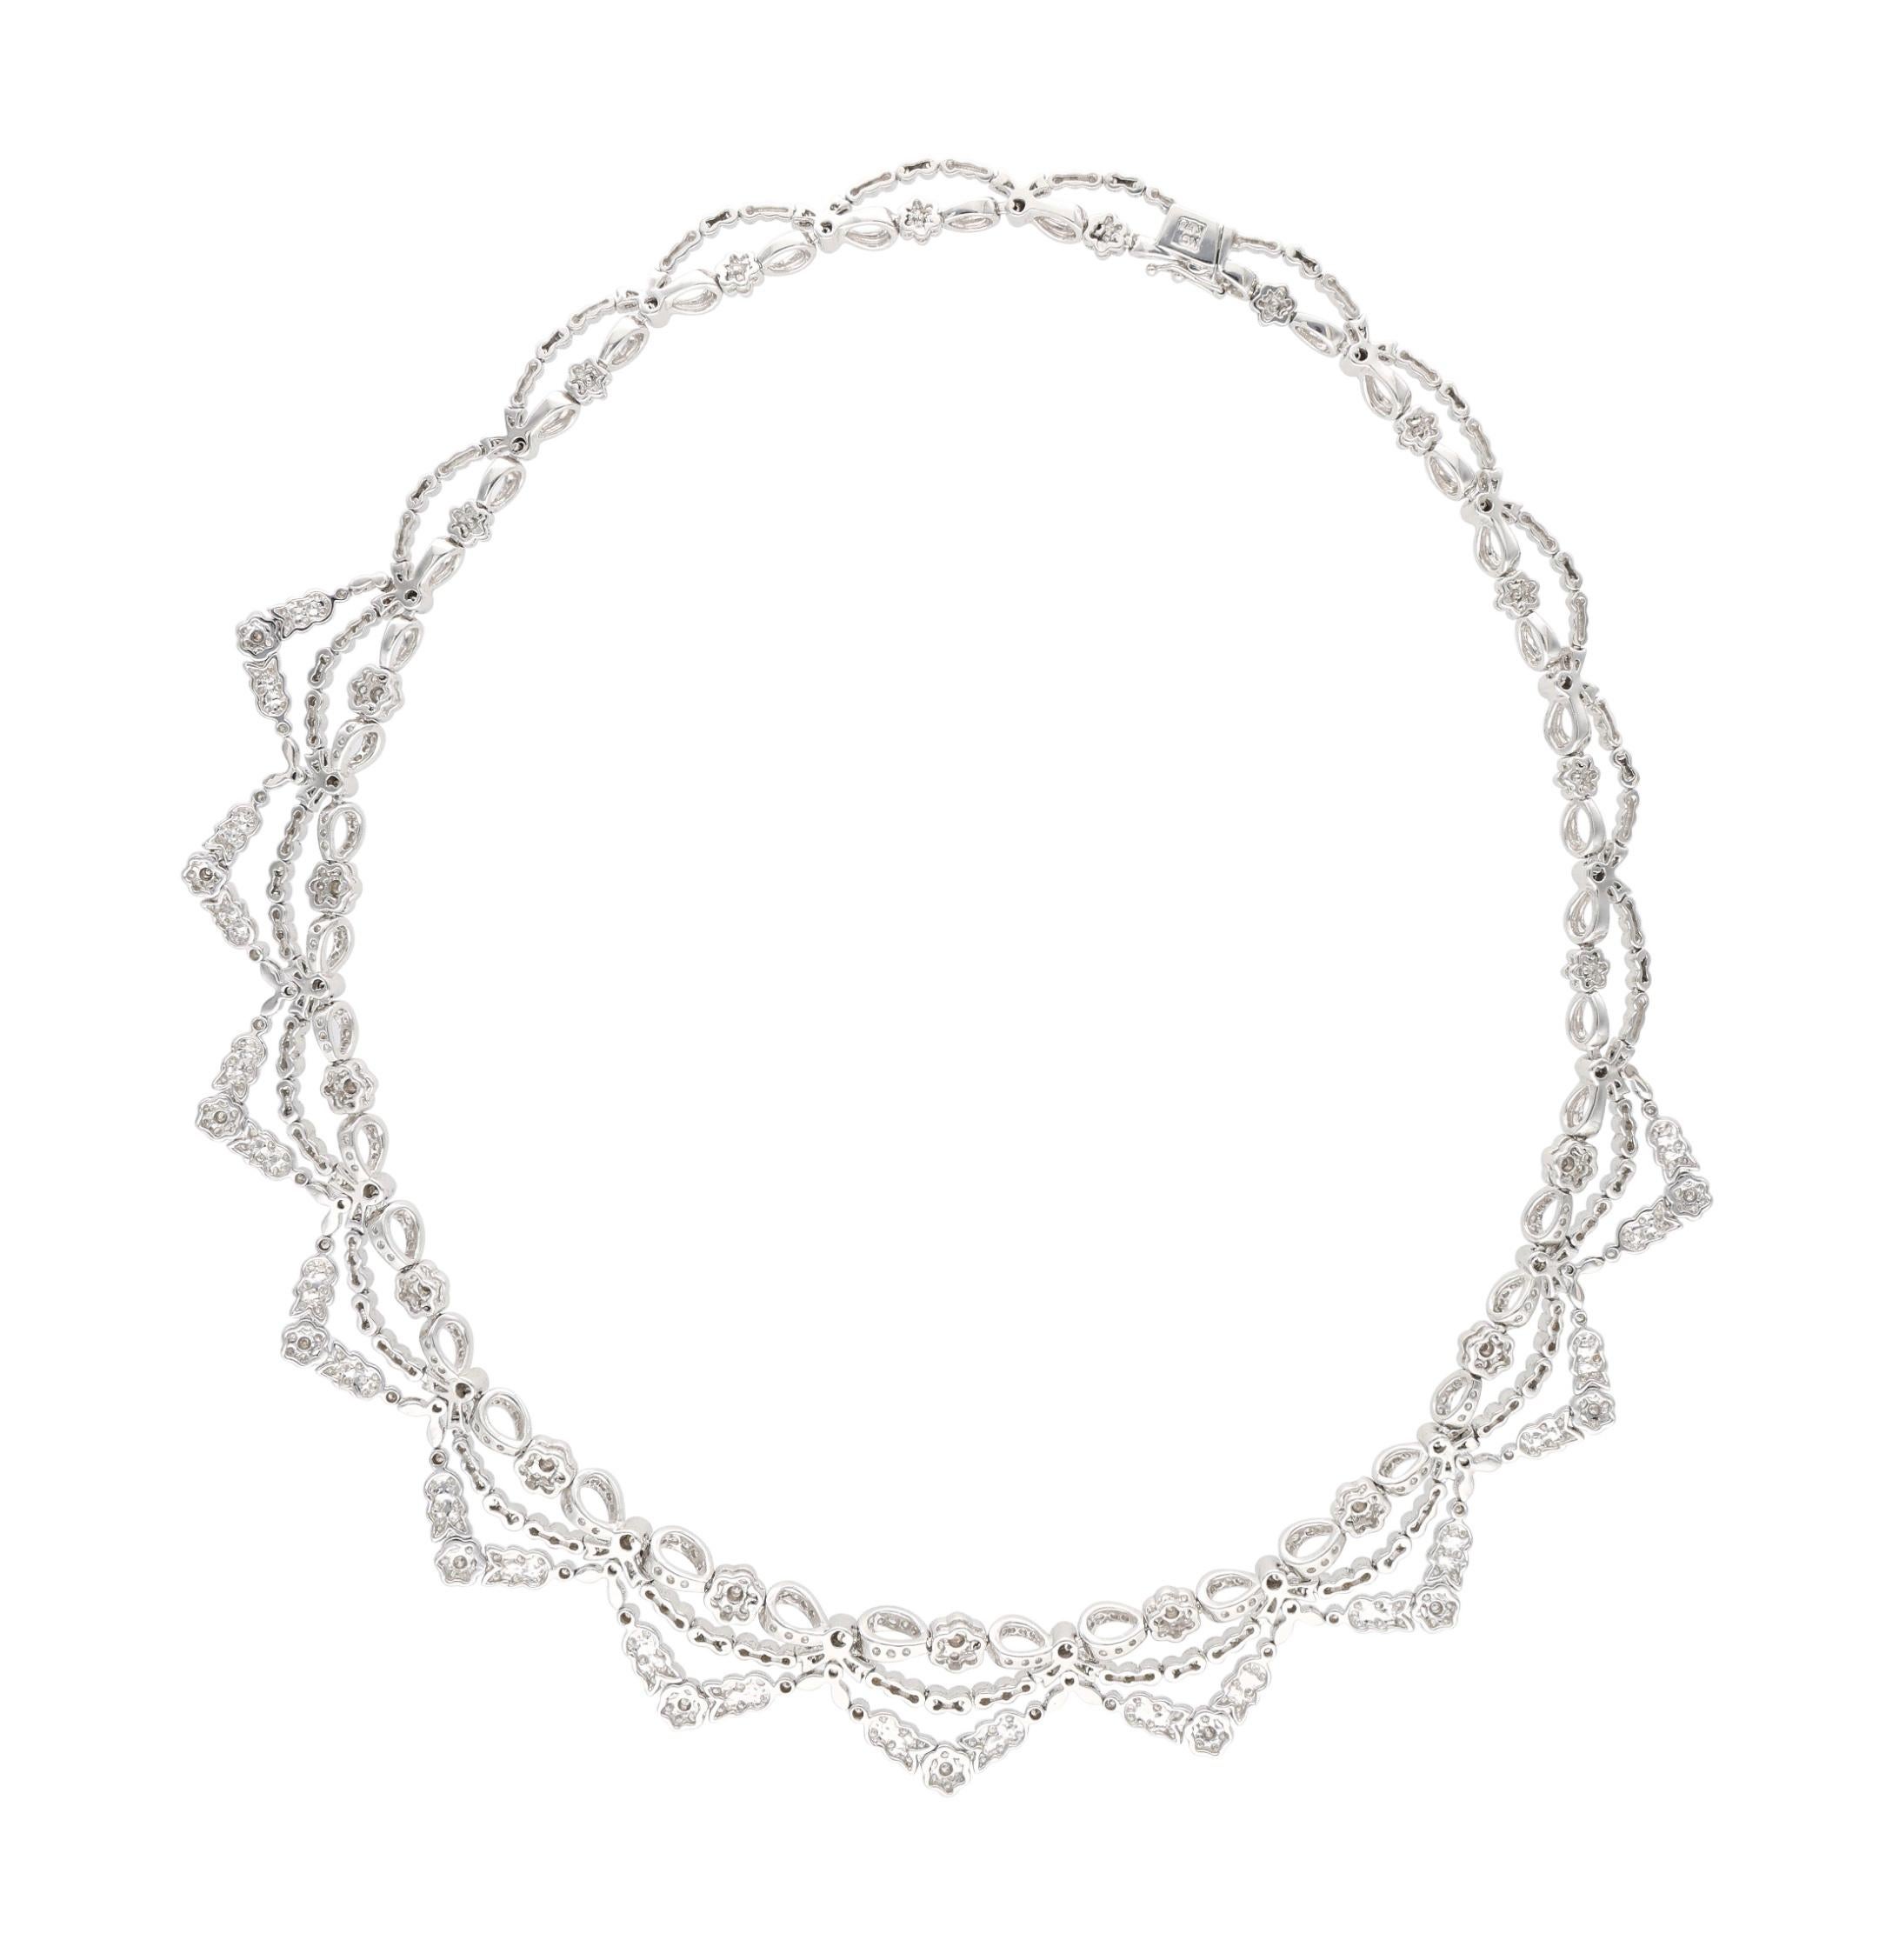 Collar necklace with floral accents set with round brilliant diamonds.

- Diamonds weigh a total of approximately 10.00 carats
- 18 karat white gold
- Total weight 58.15 grams
- Length 17 inches

The condition report is Very Good. 

Perfect for any